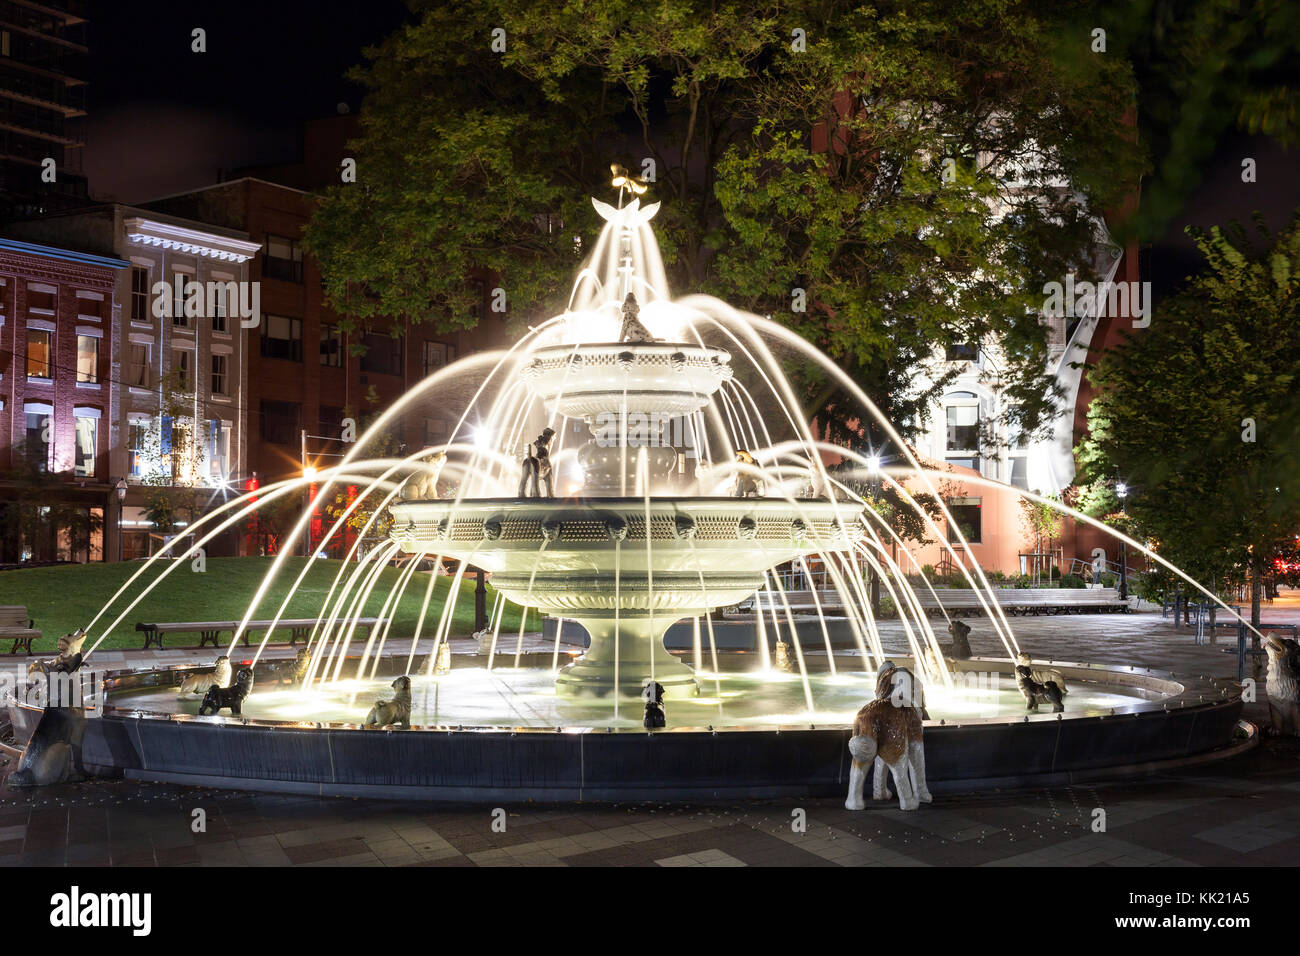 Toronto, Canada - Oct 16, 2017: Dog fountain at the Berczy Park in the city of Toronto. The fountain was designed by the architect Claude Cormier. Pro Stock Photo